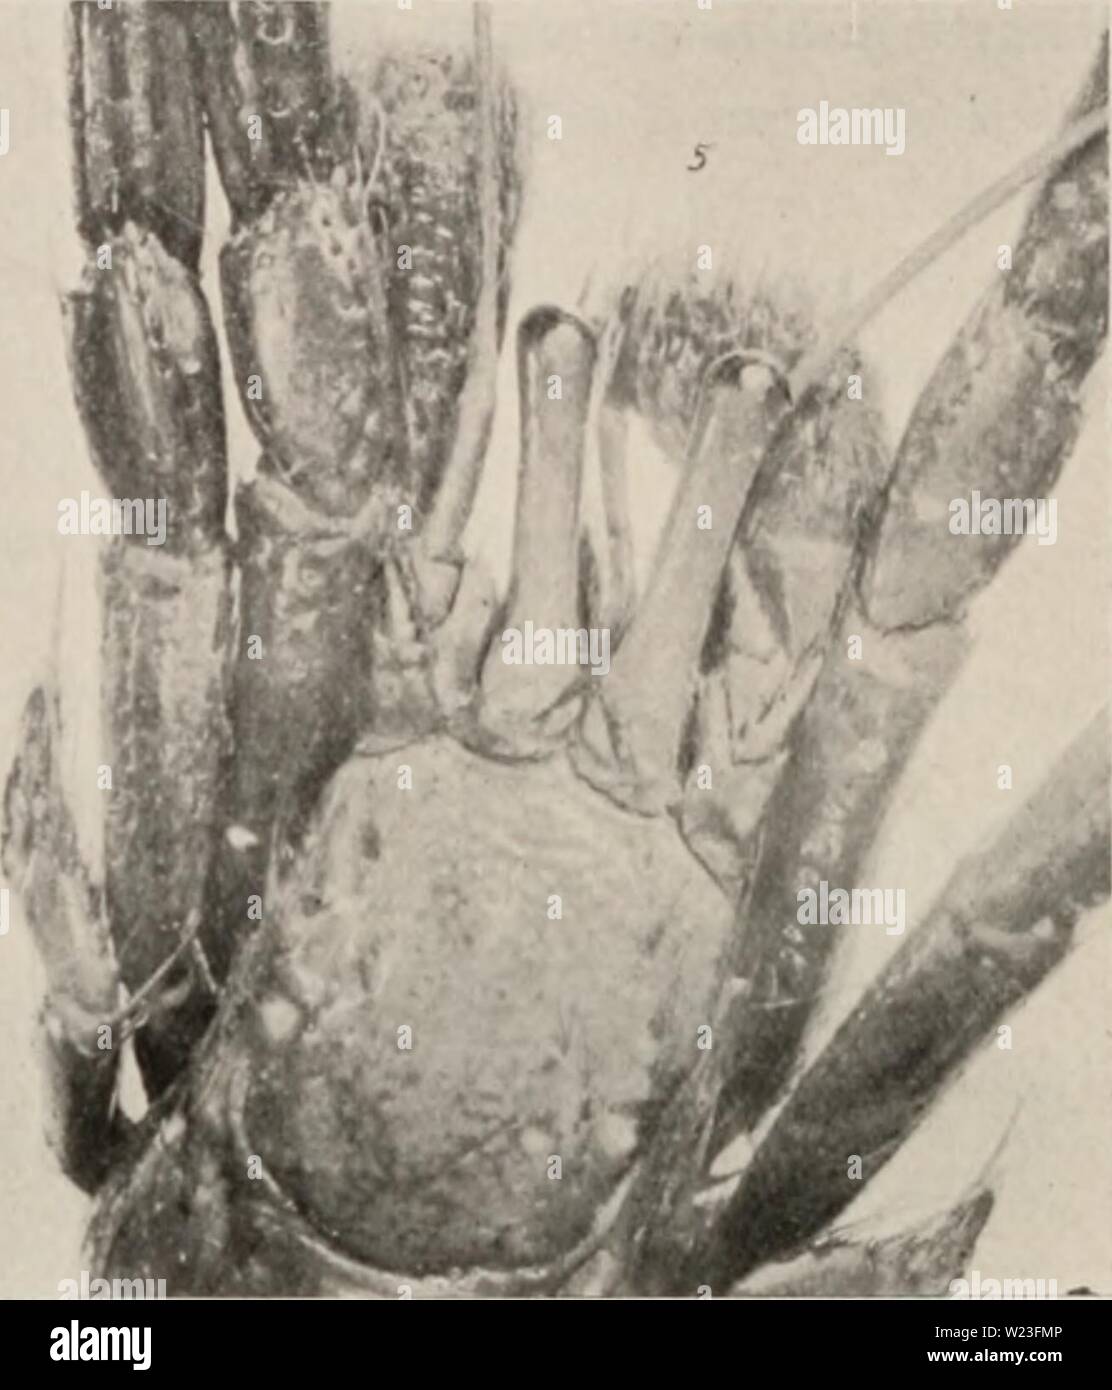 Archive image from page 161 of Decapod crustacea of Bermuda (1908-1922). Decapod crustacea of Bermuda  decapodcrustacea00verr Year: 1908-1922  452 .i. E. Verrill—Decapod Cnixlncea of Bermuda. Two small specimens were collected about l;y Dr. F. V. Ilaniliu (Vale- Ius., ML'.)); a much larger specimen, which is the one figured, was taken in the summer of l'.io:l, by the party of the  i •/ Bermuda Biological Station, at Coney Island.    Figure 66.—Clibnma-ins hebes, anterior parts, x about 4. Phot. A. H. V. (tr&gt;/i-f/j&gt;/i/&lt;'3 per cent., have been recorded also from the Florida Keys or th Stock Photo